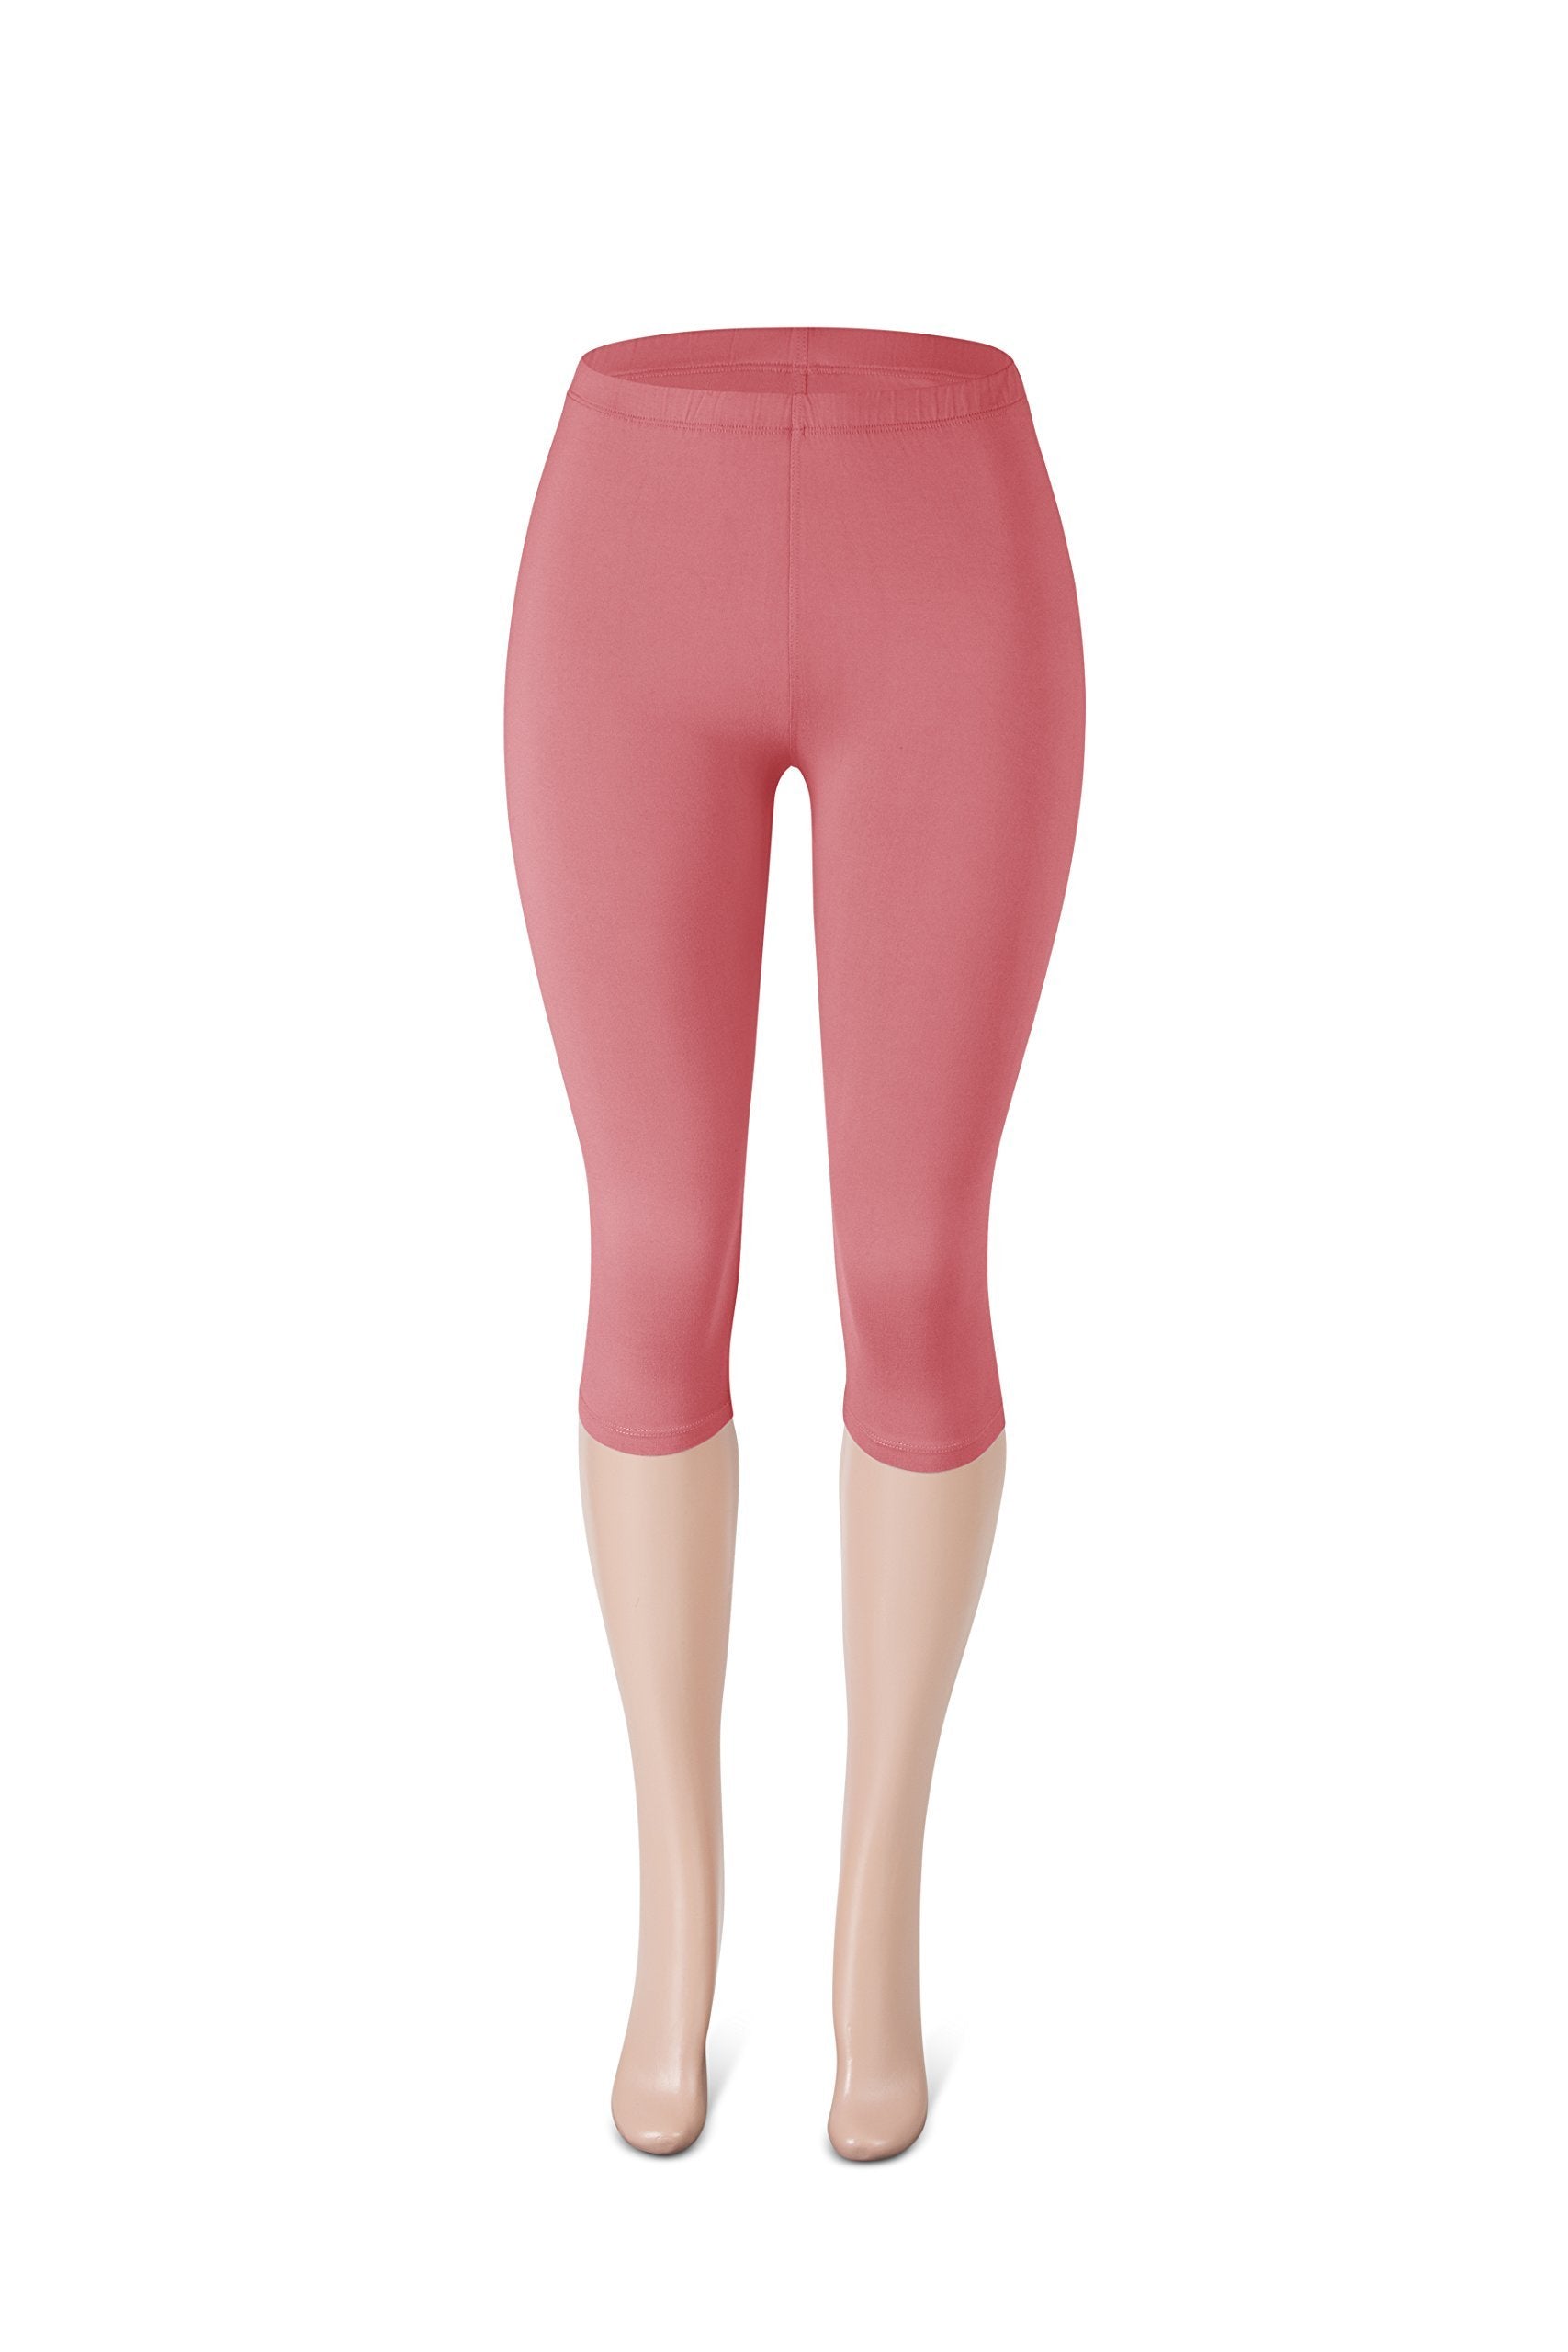 High Waisted SATINA Leggings | Full Length | Neon Coral | One Size Fits Most